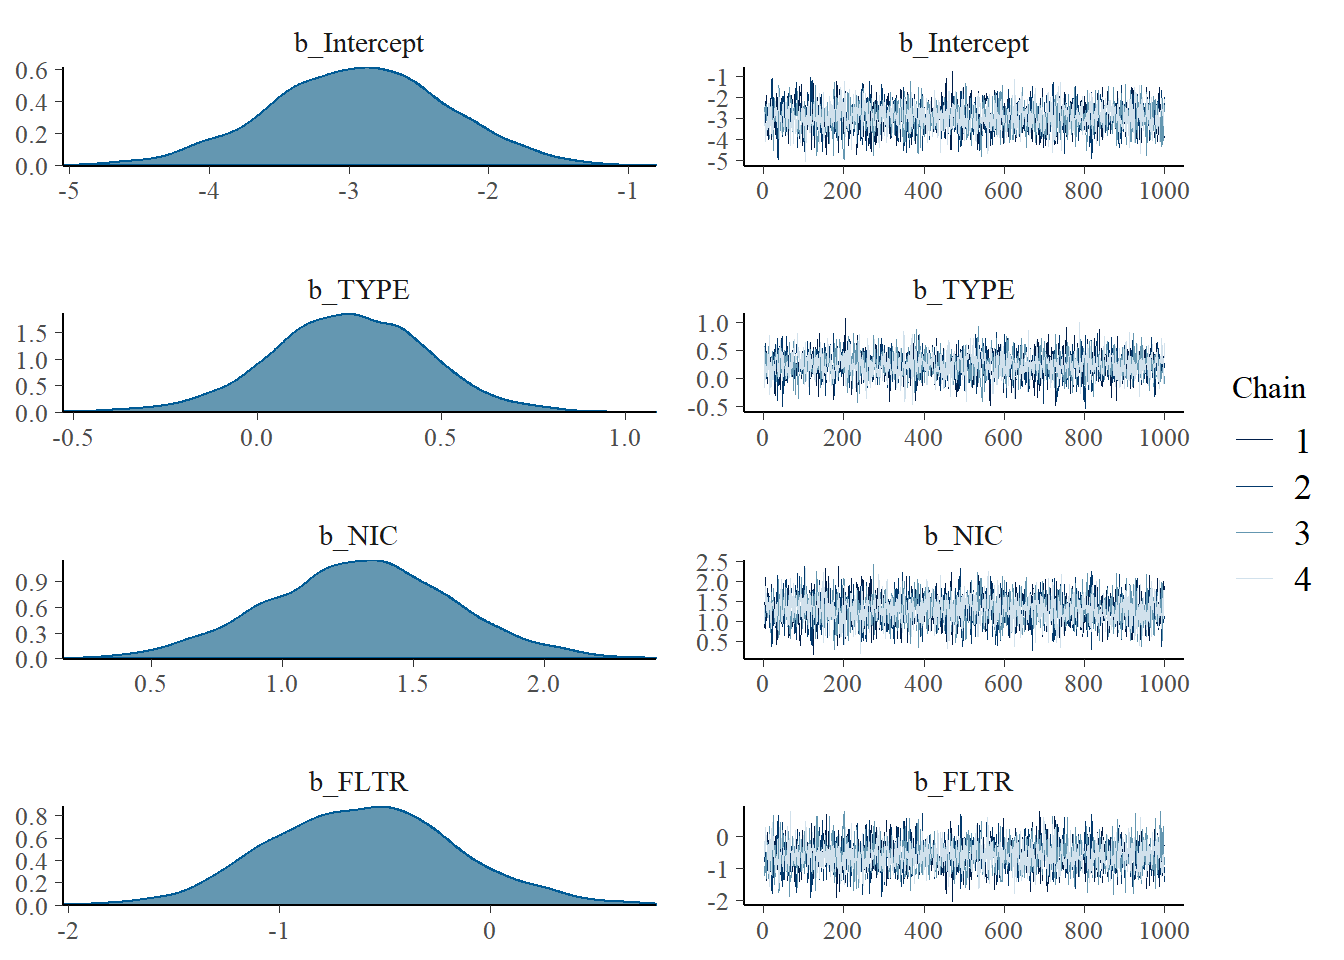 Posterior Distribution + Trace plot combining all chains